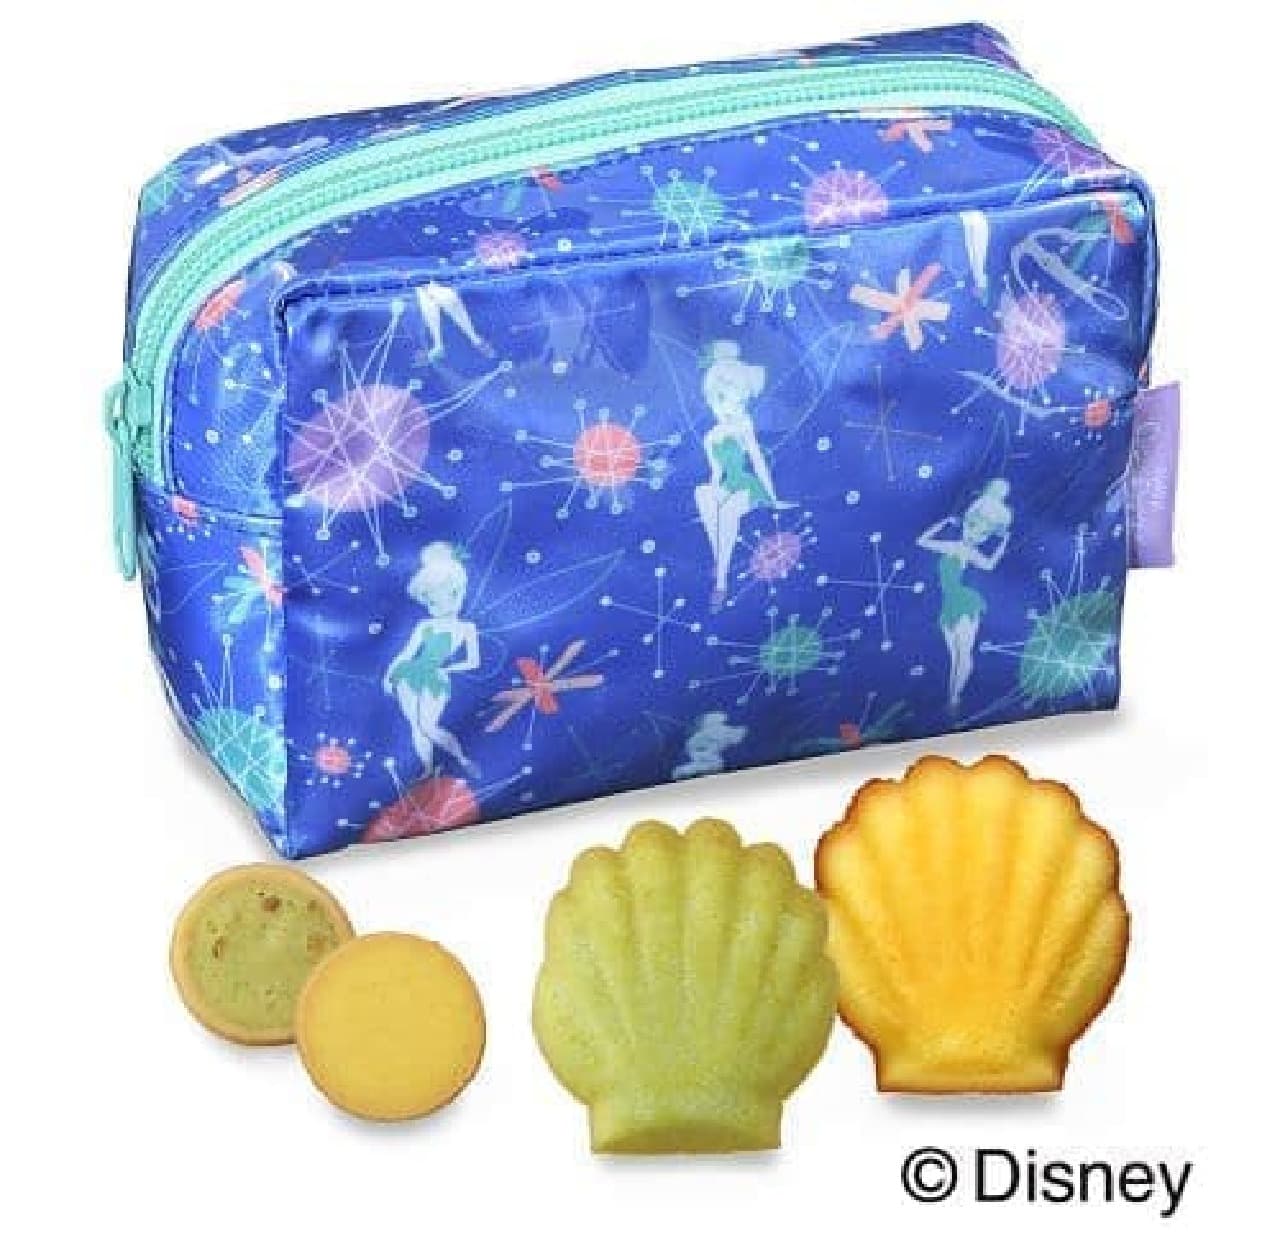 "[Tinker Bell] Pouch (4 types, 8 pieces)" is a vinyl pouch containing madeleine and cookies.